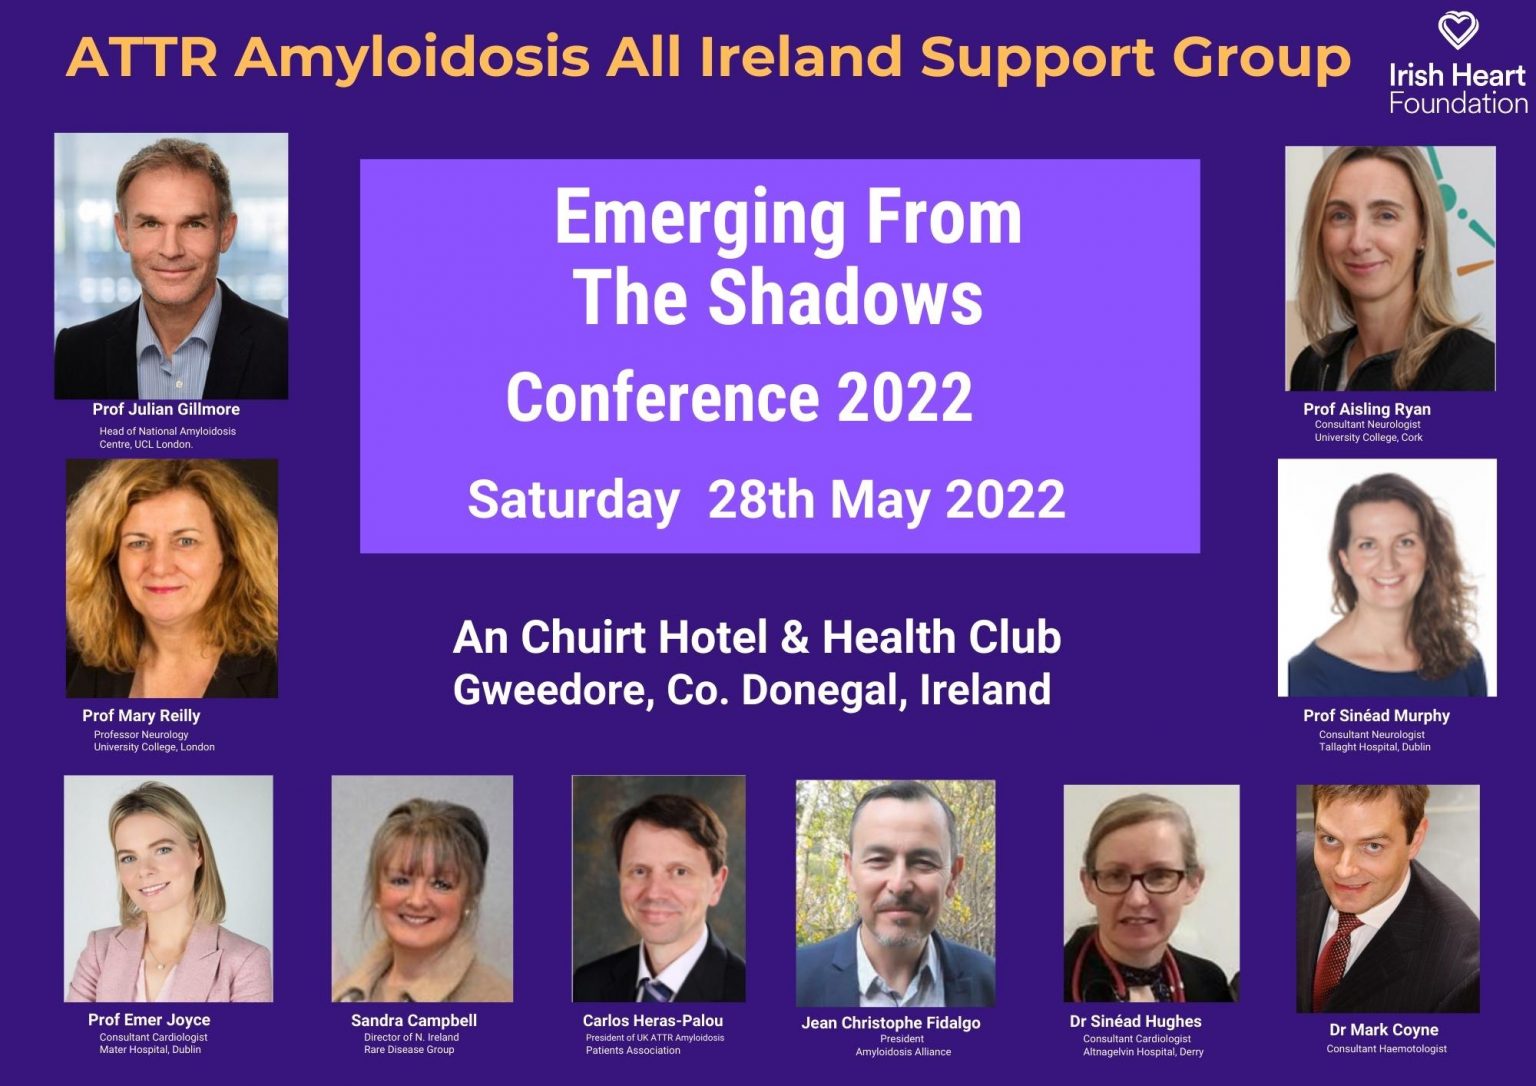 Conference on rare "Donegal Amy" disease taking place in Gweedore this